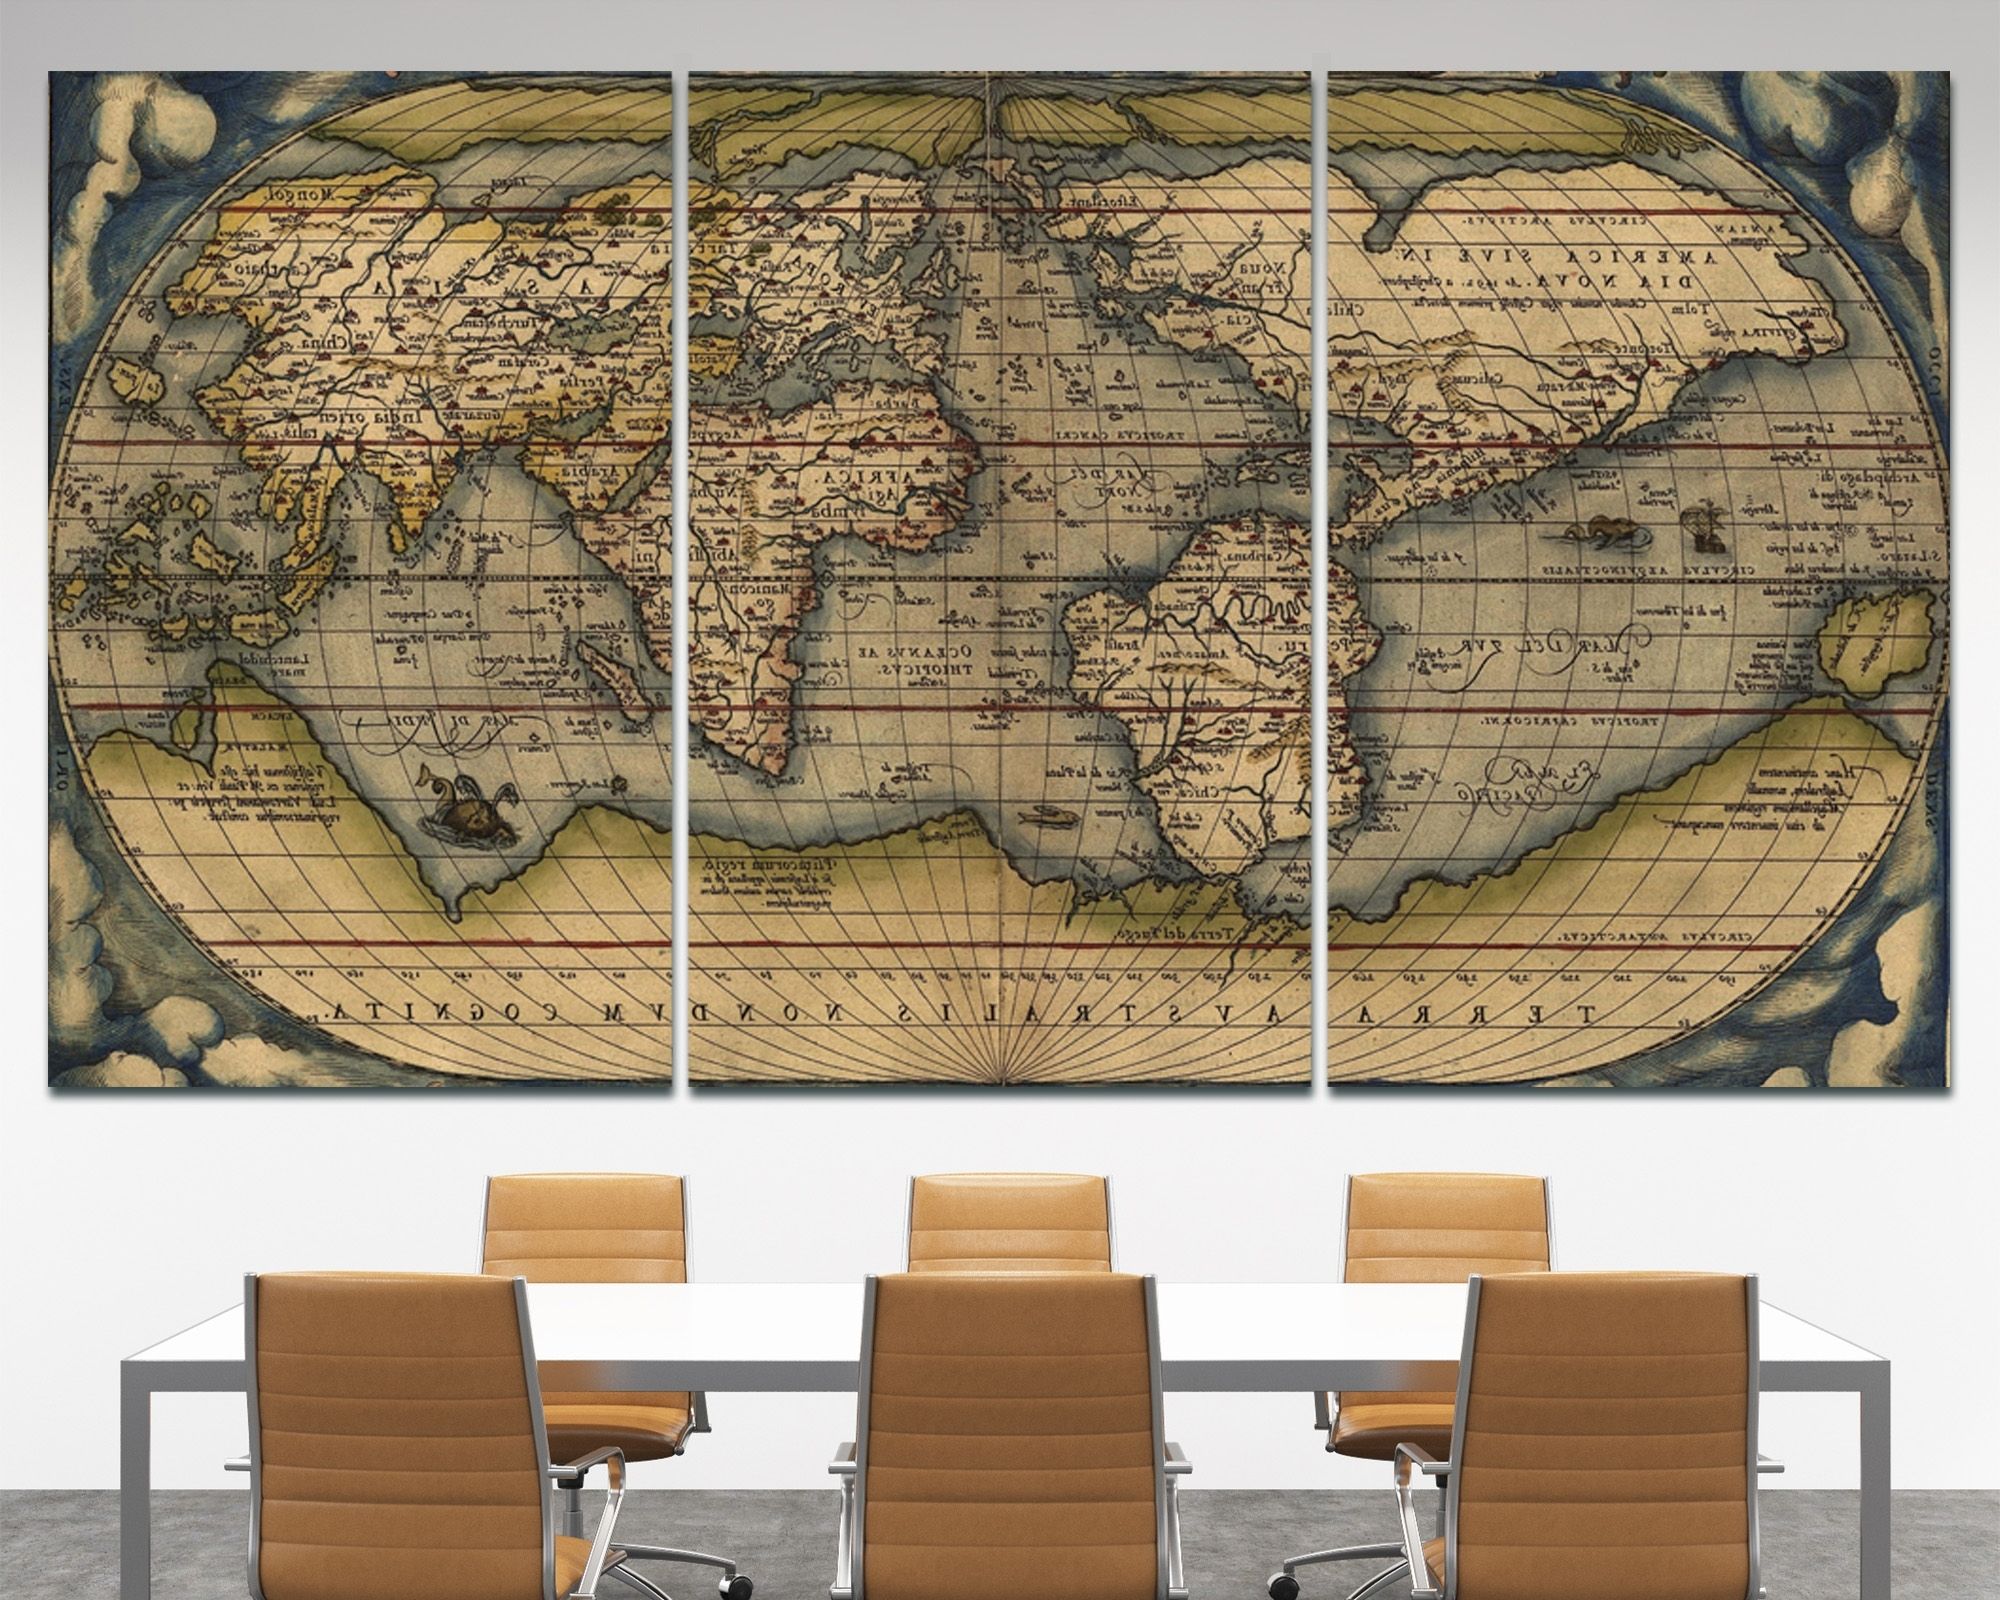 Large Vintage Wall Art Old World Map At Texelprintart With Regard To Most Popular World Map For Wall Art (View 11 of 20)